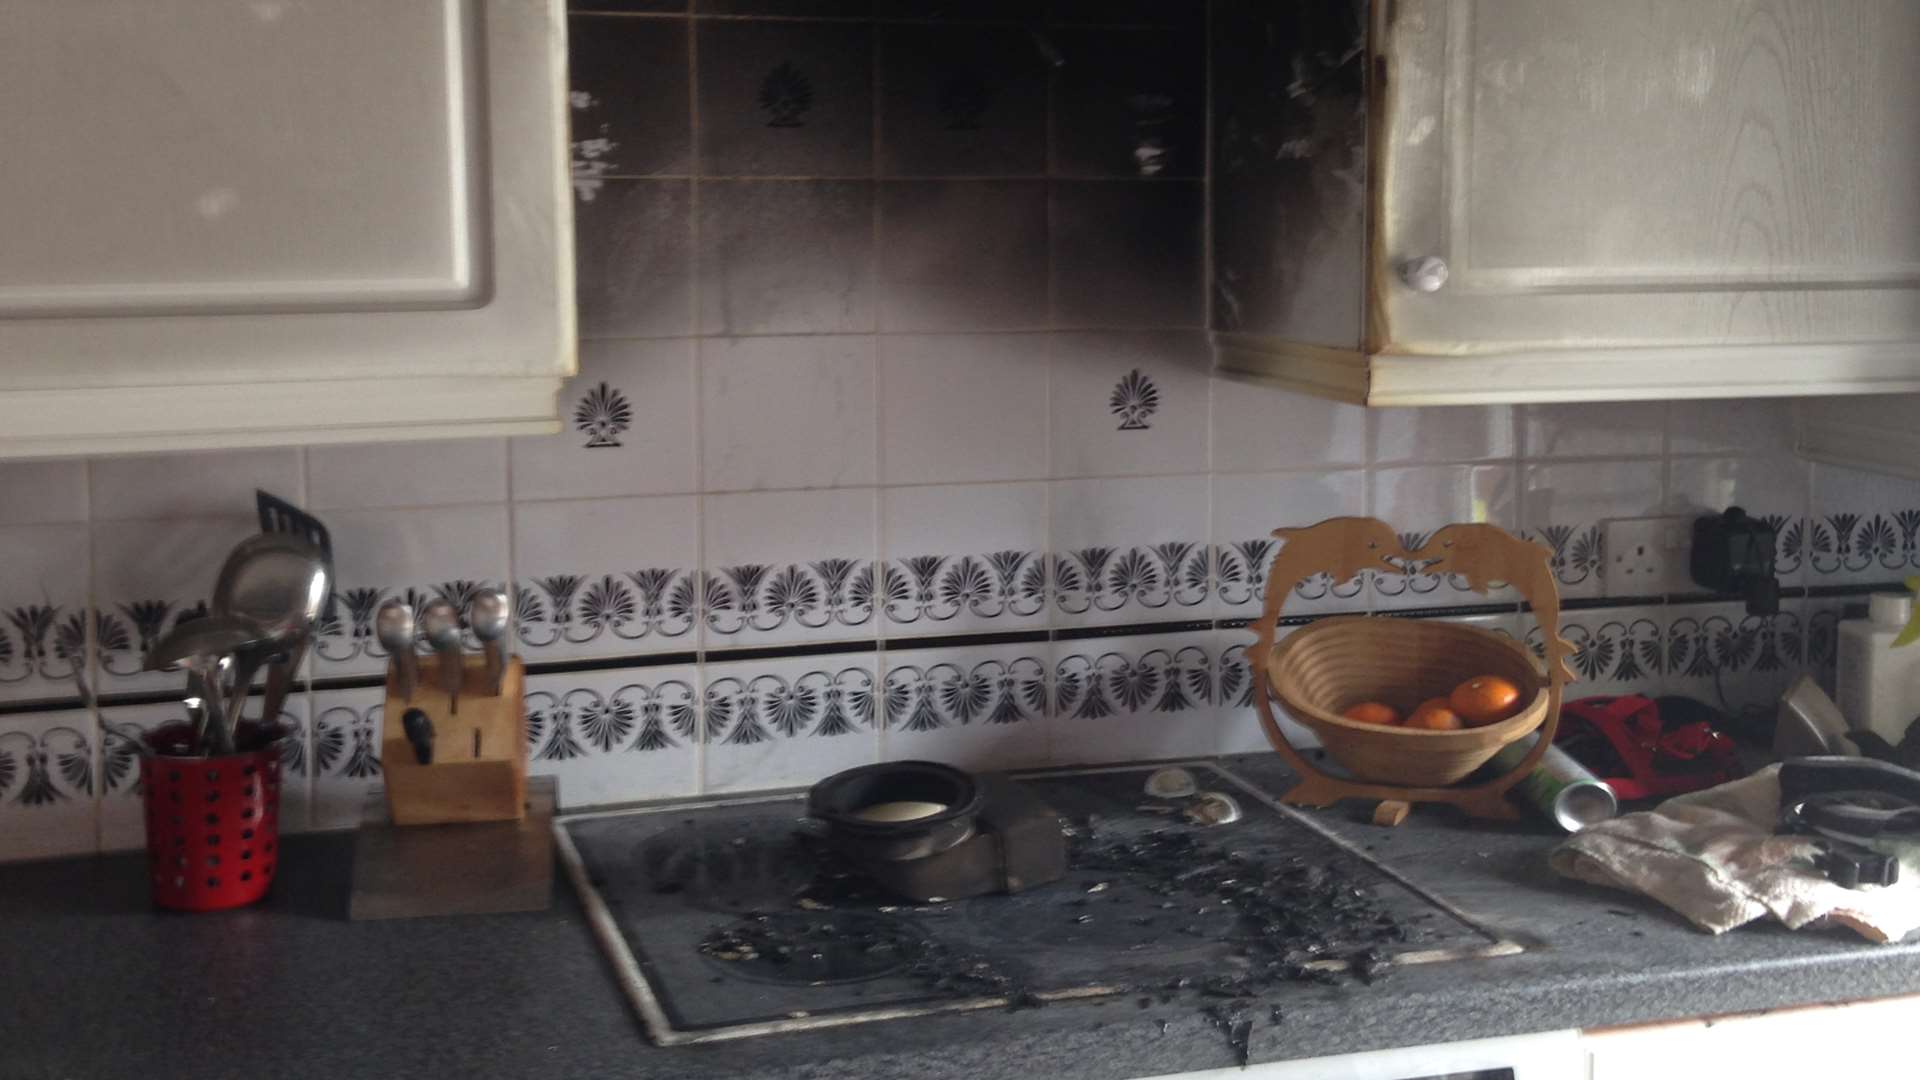 The damaged cooker